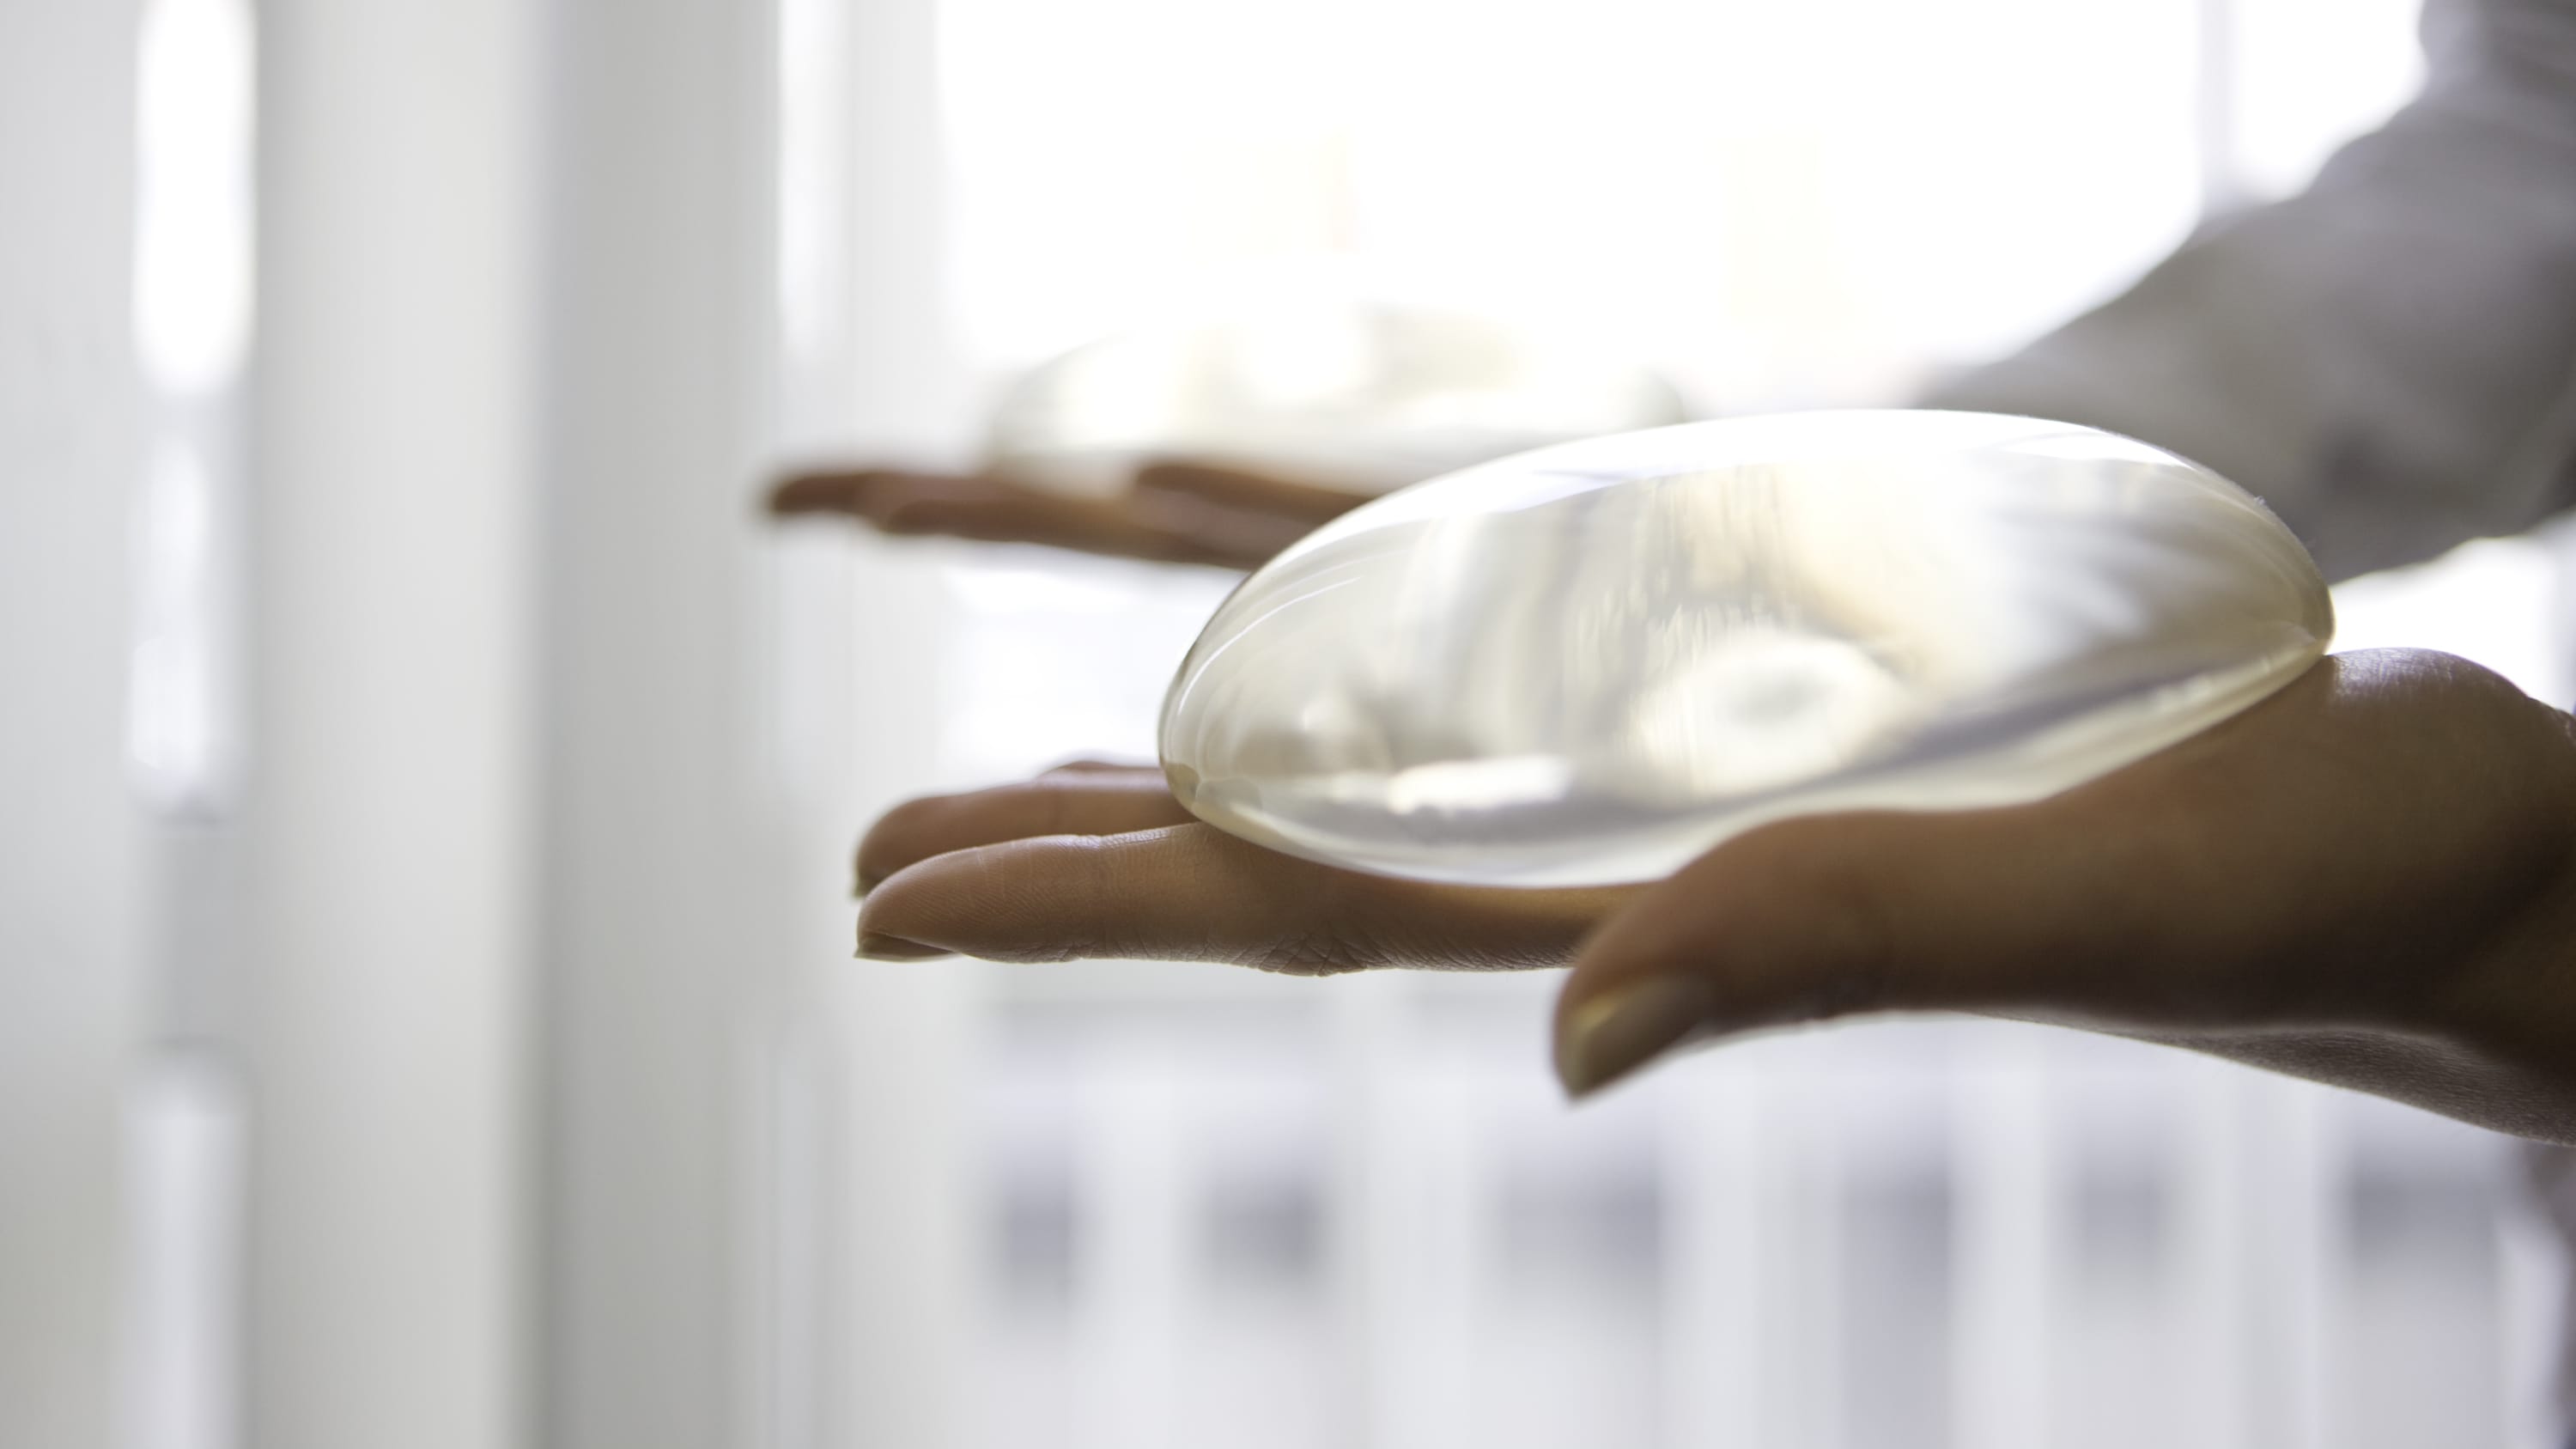 Hands holding a round, silicone breast implant.